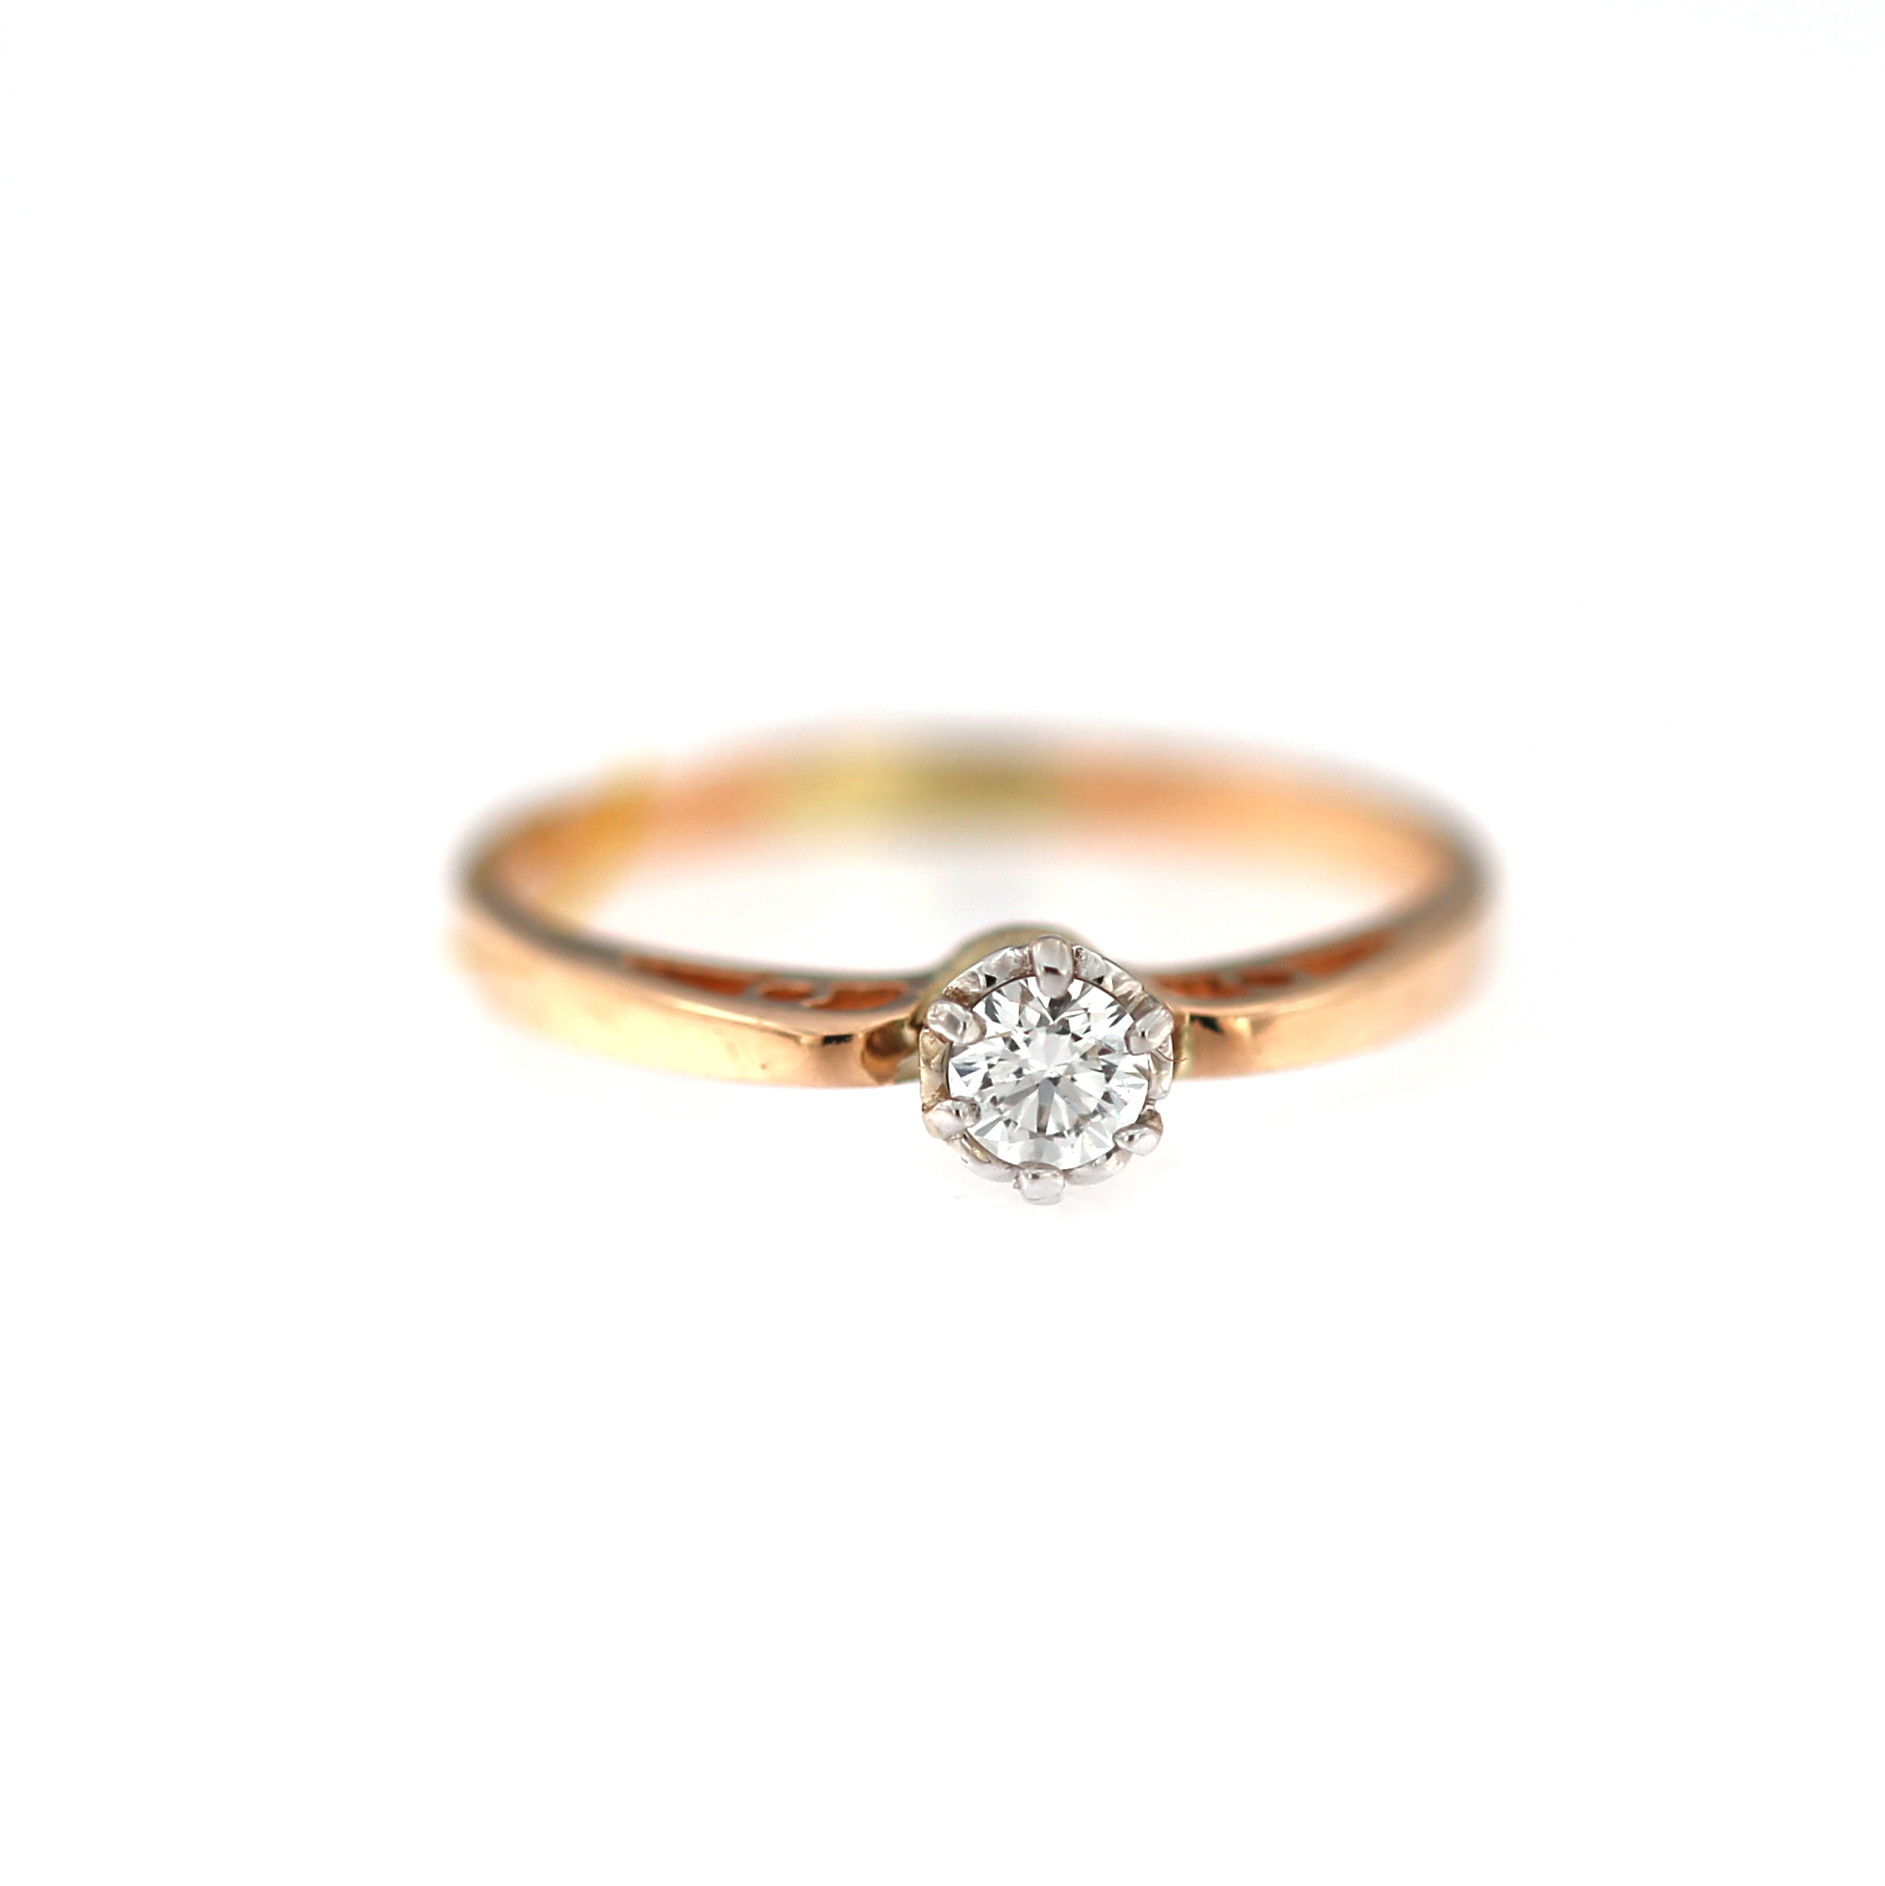 Rose gold ring with diamond DRBR02-15 0.13CT